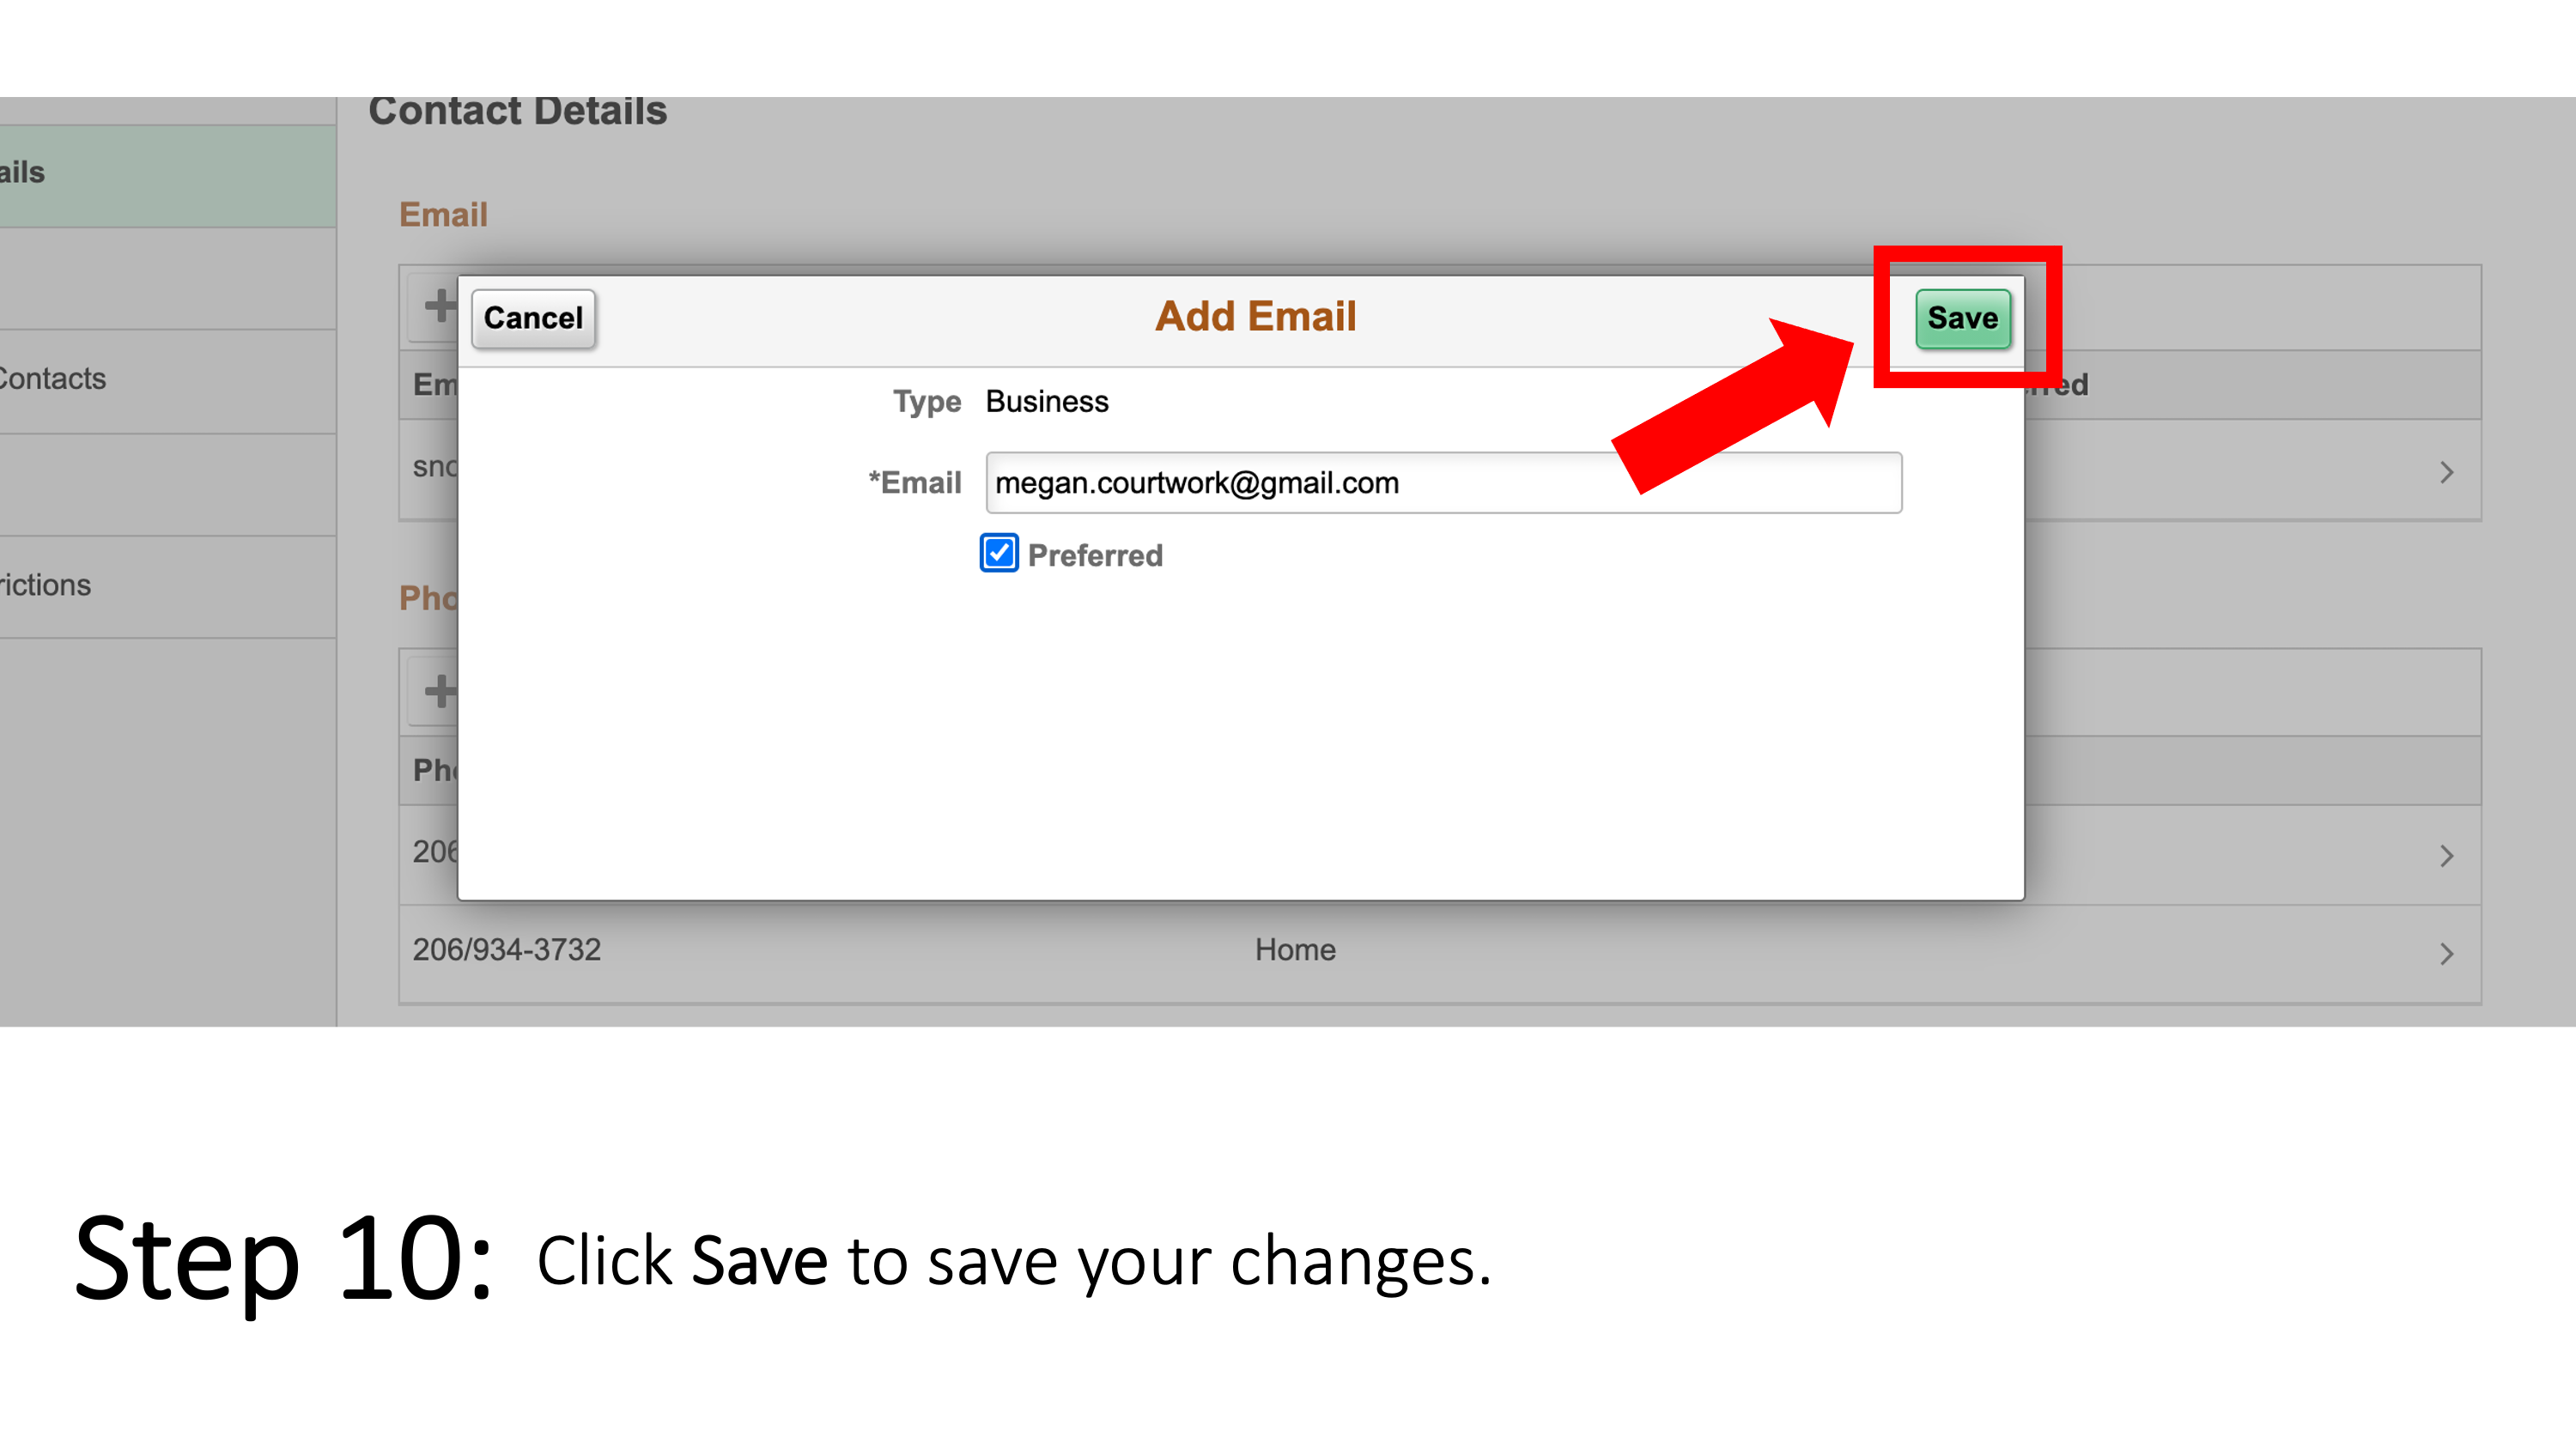 Click Save to save your changes.